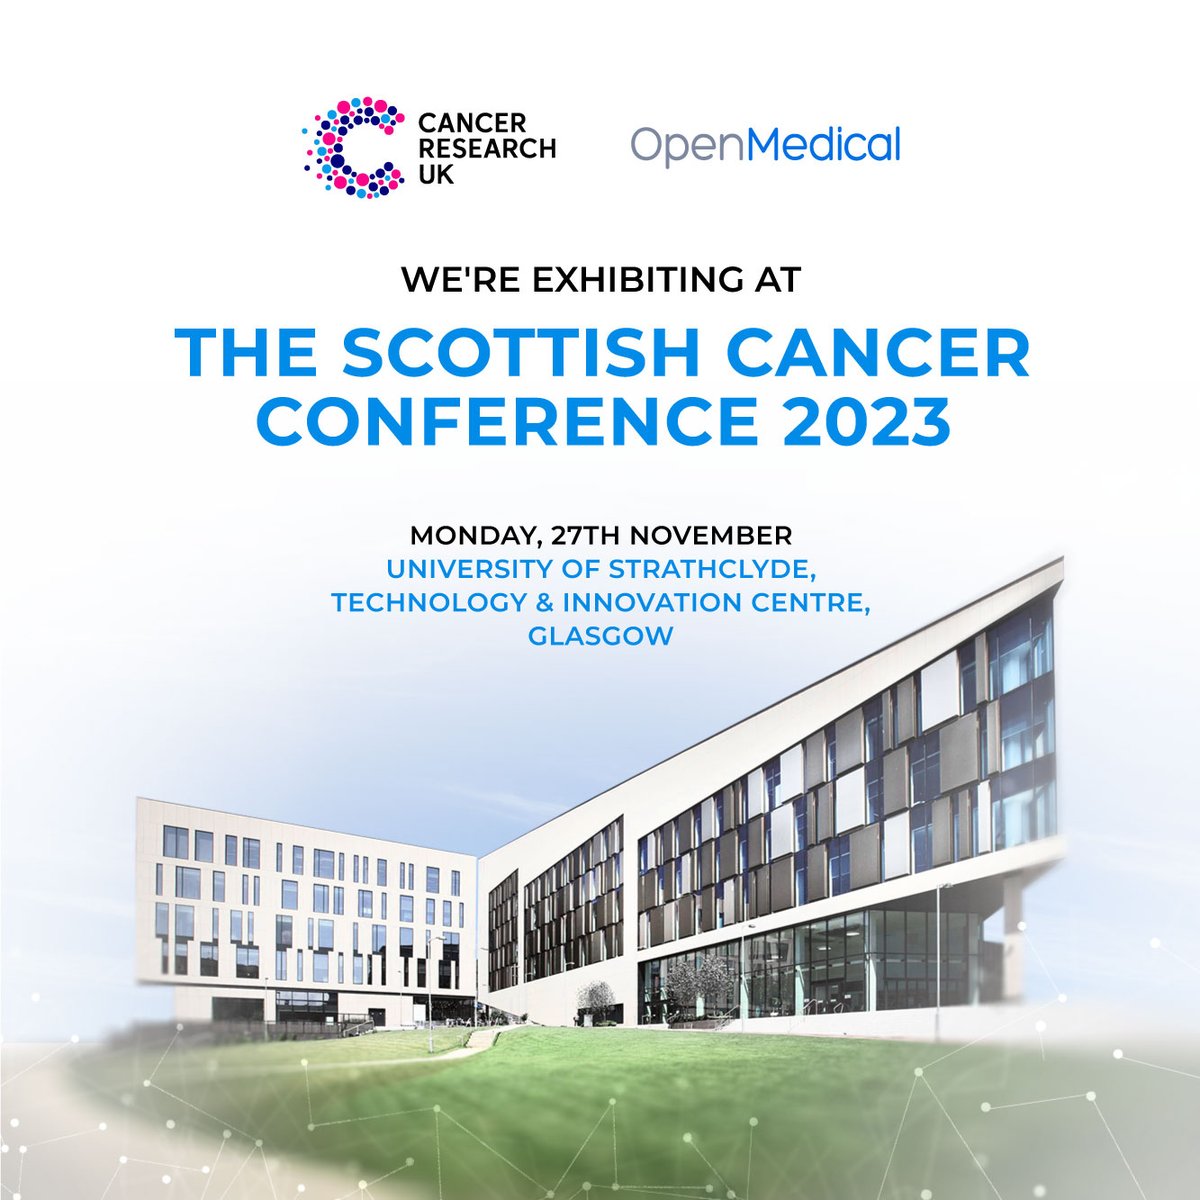 Looking forward to Monday where we will be exhibiting at the @ScotCancerConf at @UniStrathclyde.🏴󠁧󠁢󠁳󠁣󠁴󠁿 Our team will be showcasing our Pathpoint Oncology and eDerma platforms, designed to support end-to-end clinical workflows for any cancer pathway.💫 @CRUKScotland #ScotCanConf